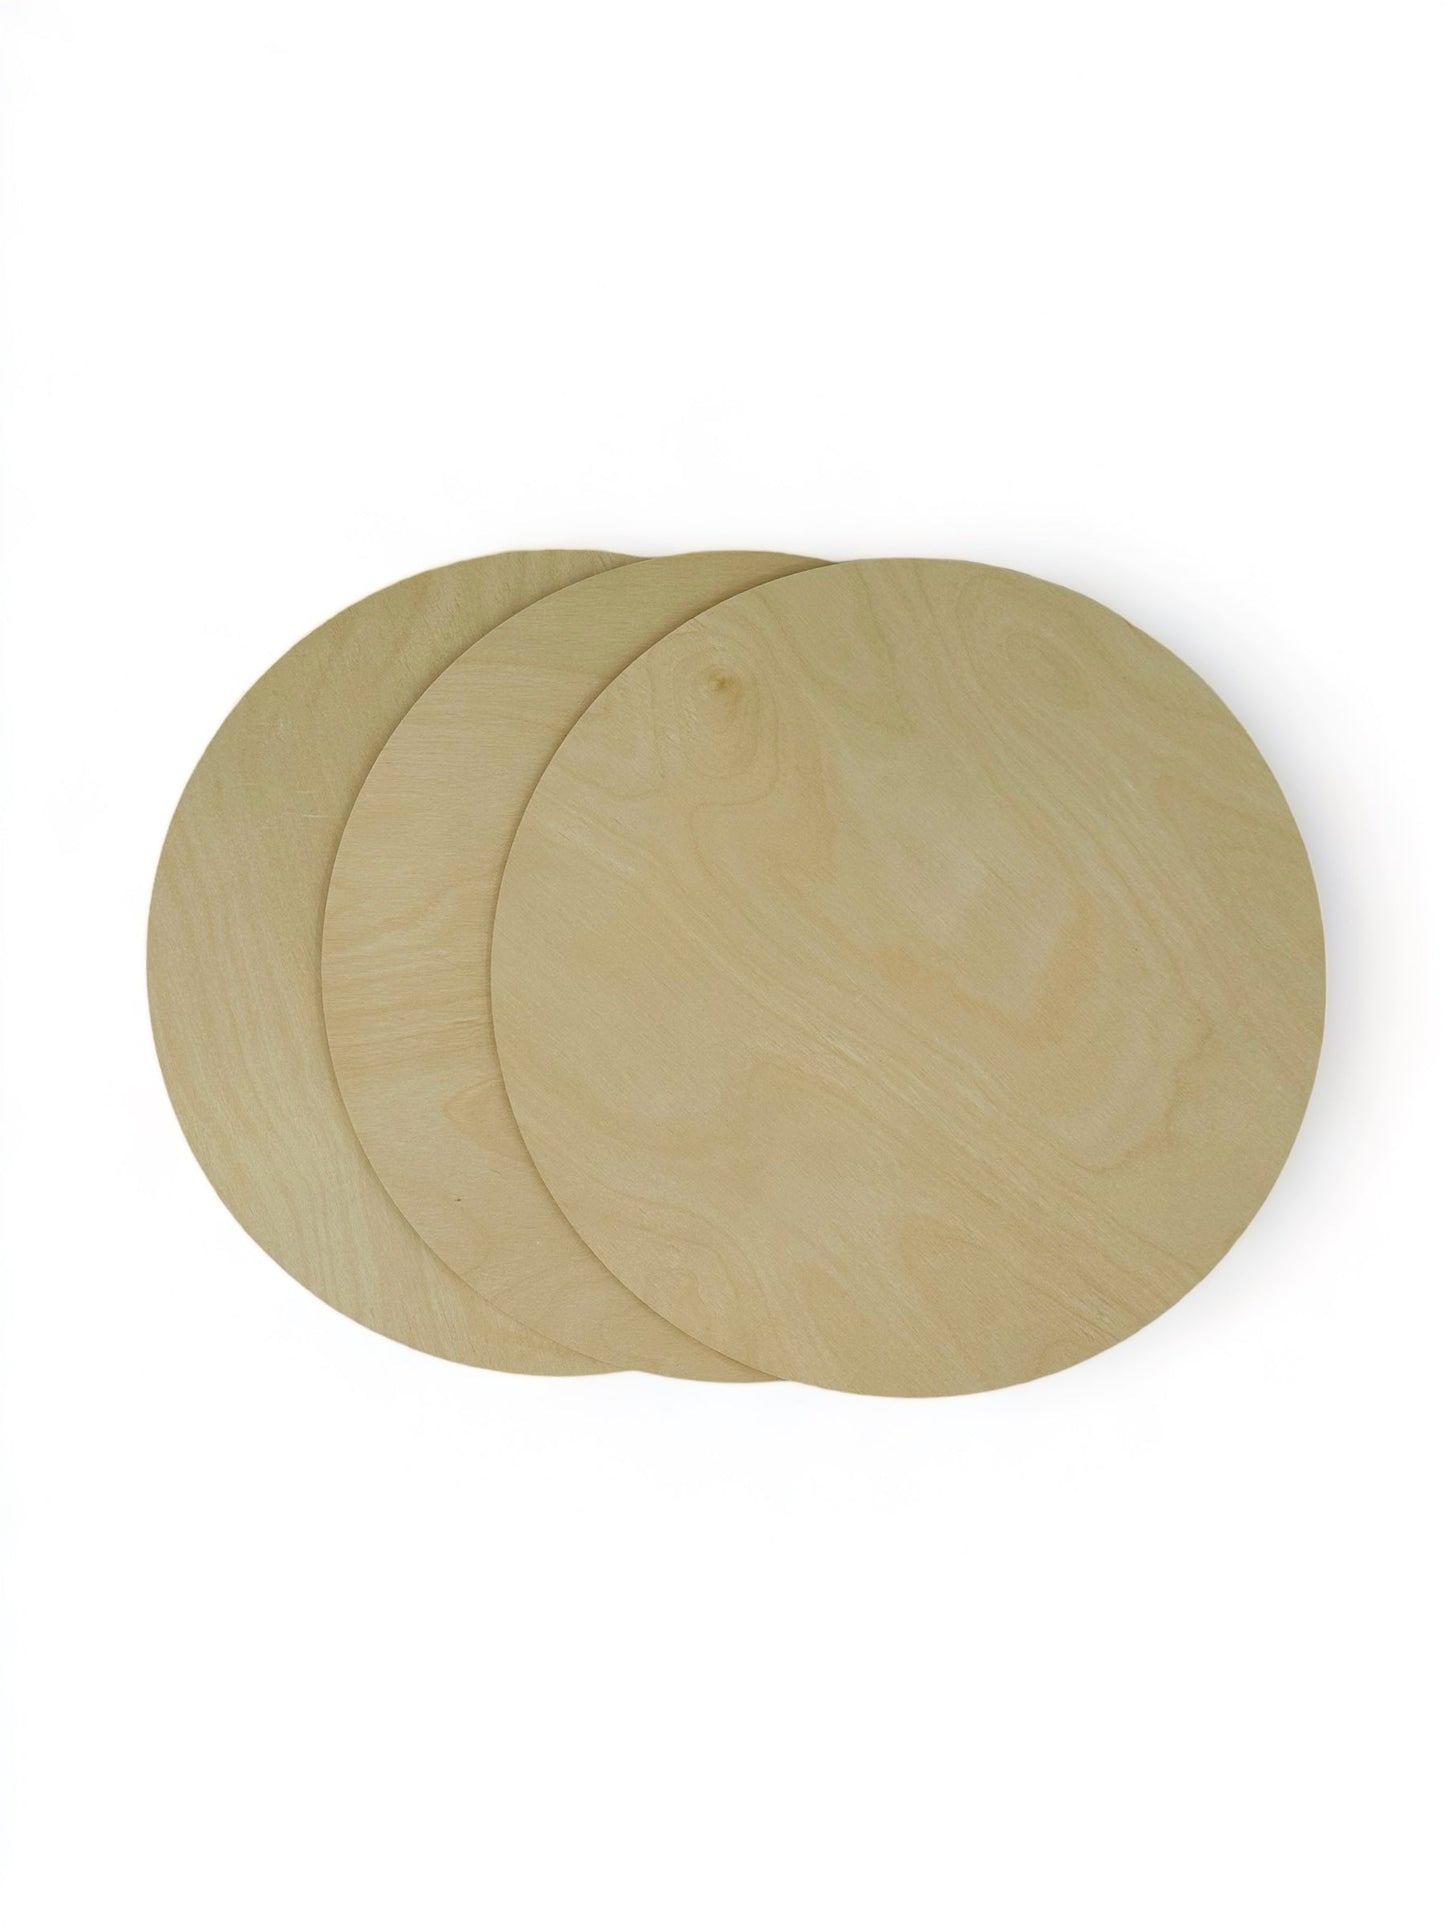 16 inch Baltic Birth Plywood Wooden Crafting Round Cutouts - 1/2inch thick